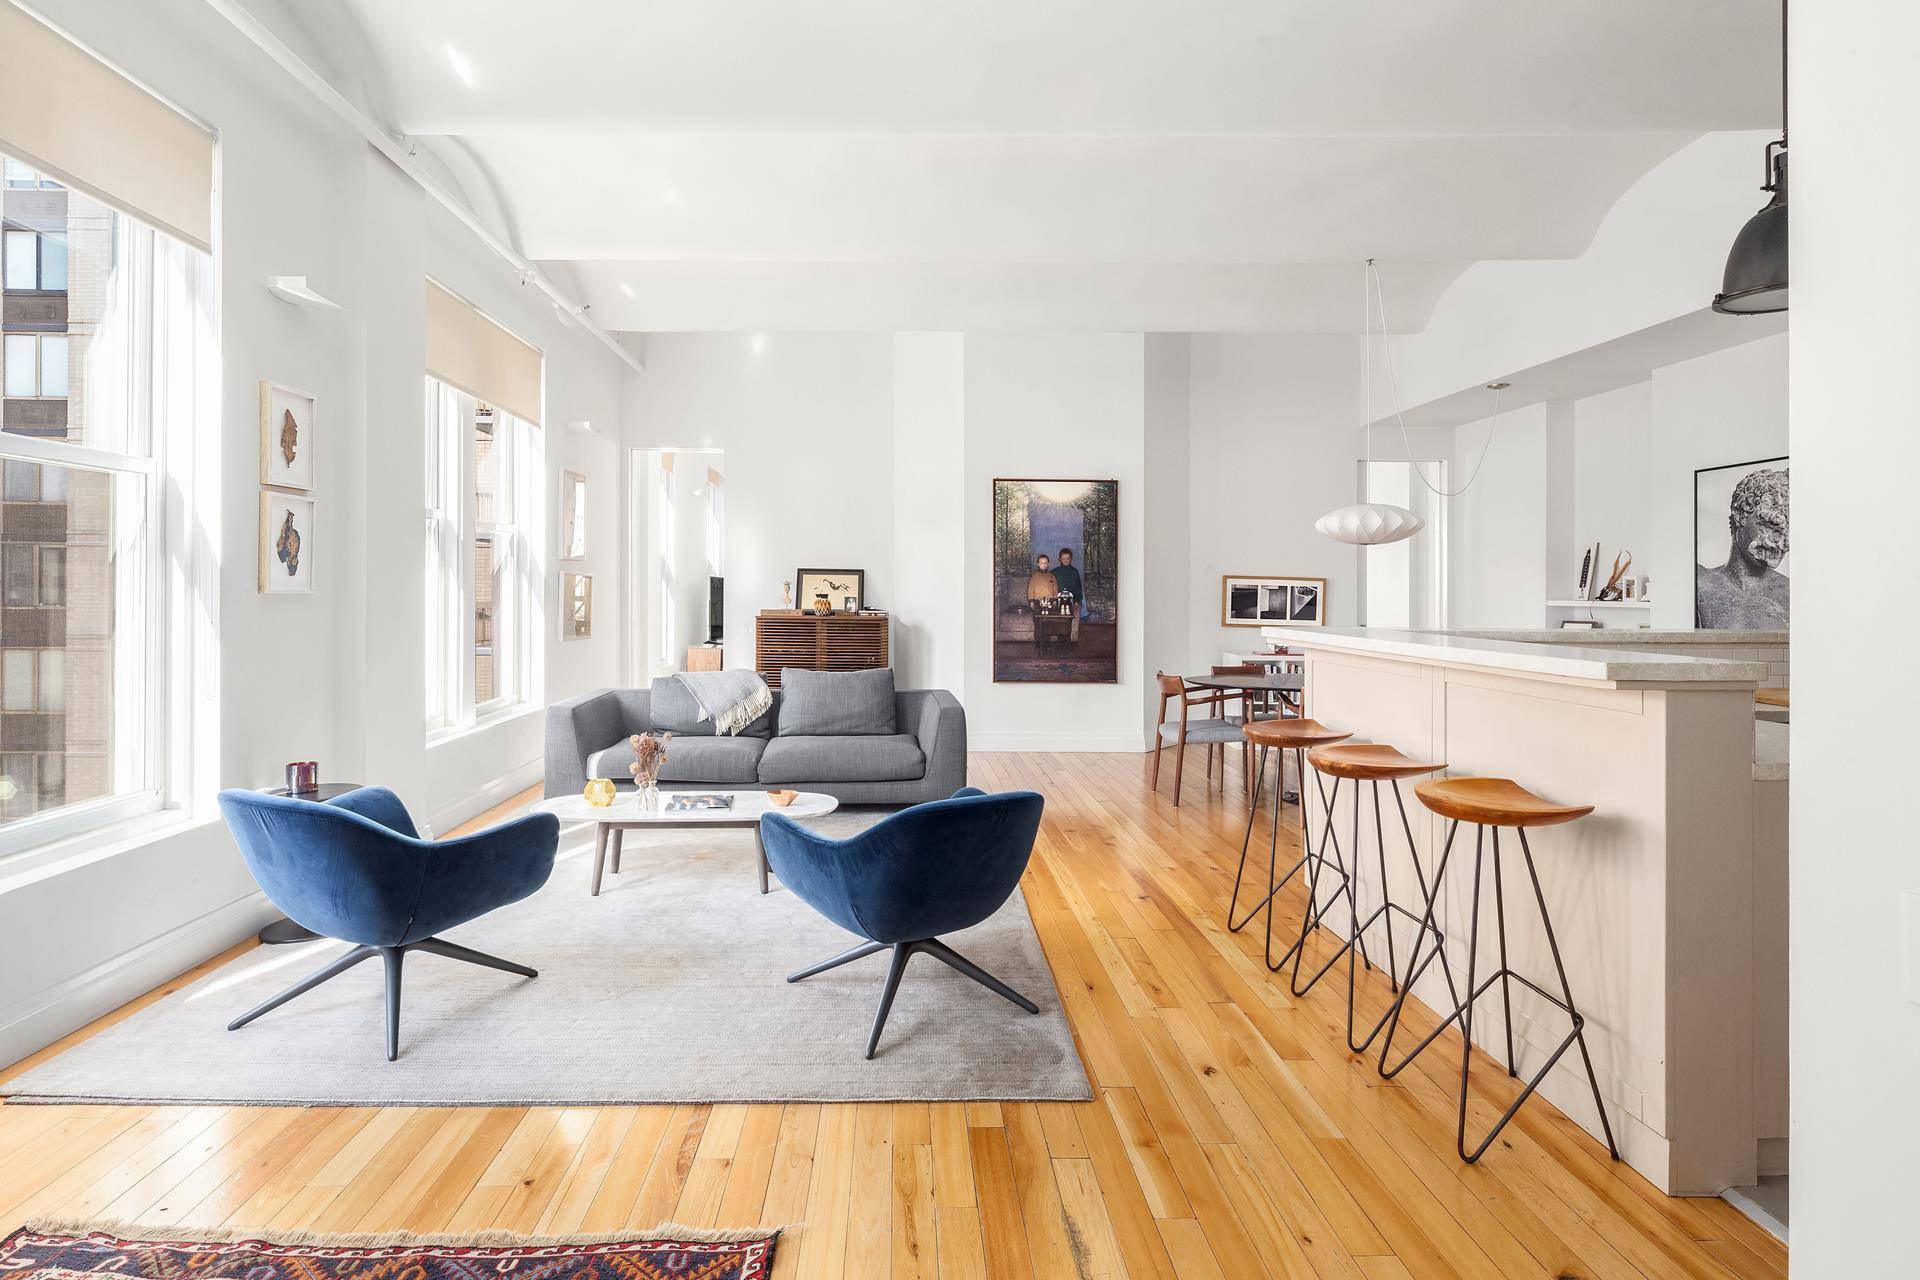 Rarely available, this light filled 2000 SF beautiful loft with 11' vaulted ceilings and attractive reclaimed elm floorings is situated on the prettiest tree lined block in the Flat Iron ...